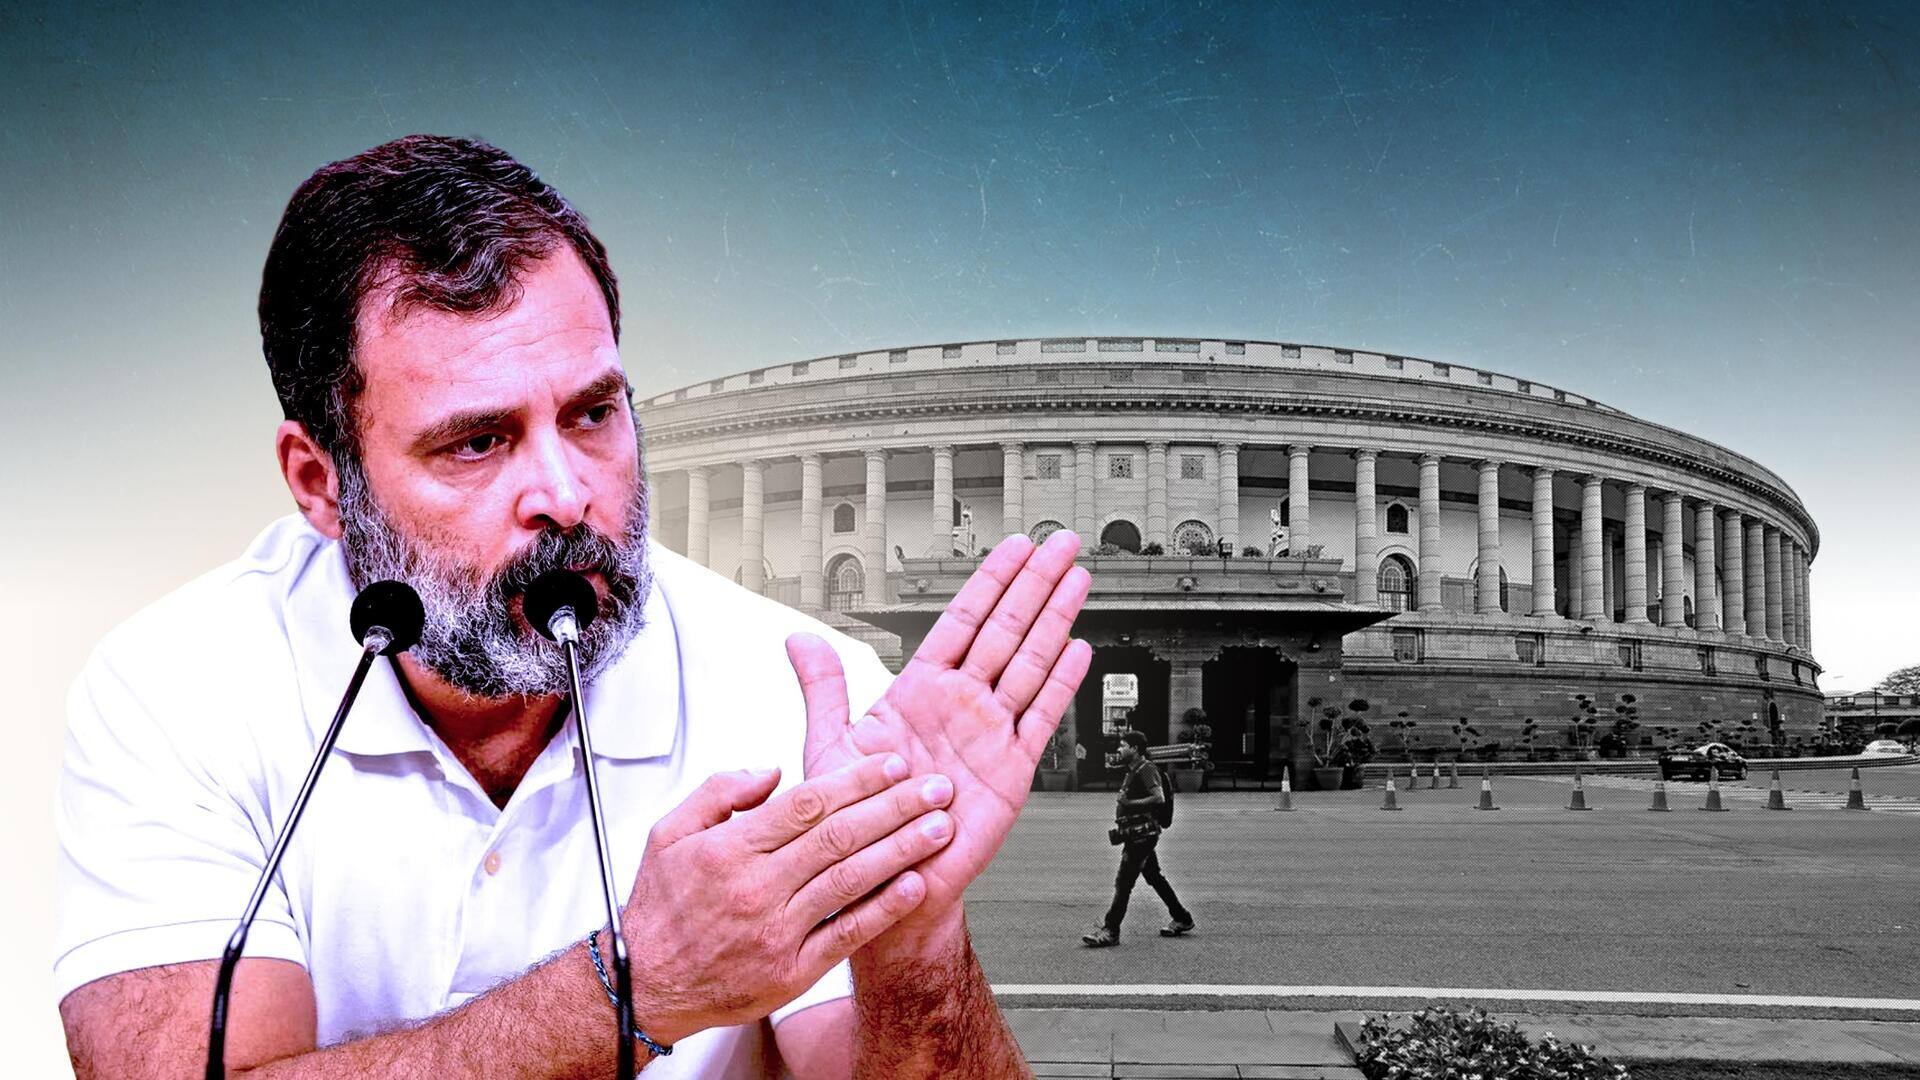 After SC order, will Rahul Gandhi rejoin Parliament this session?